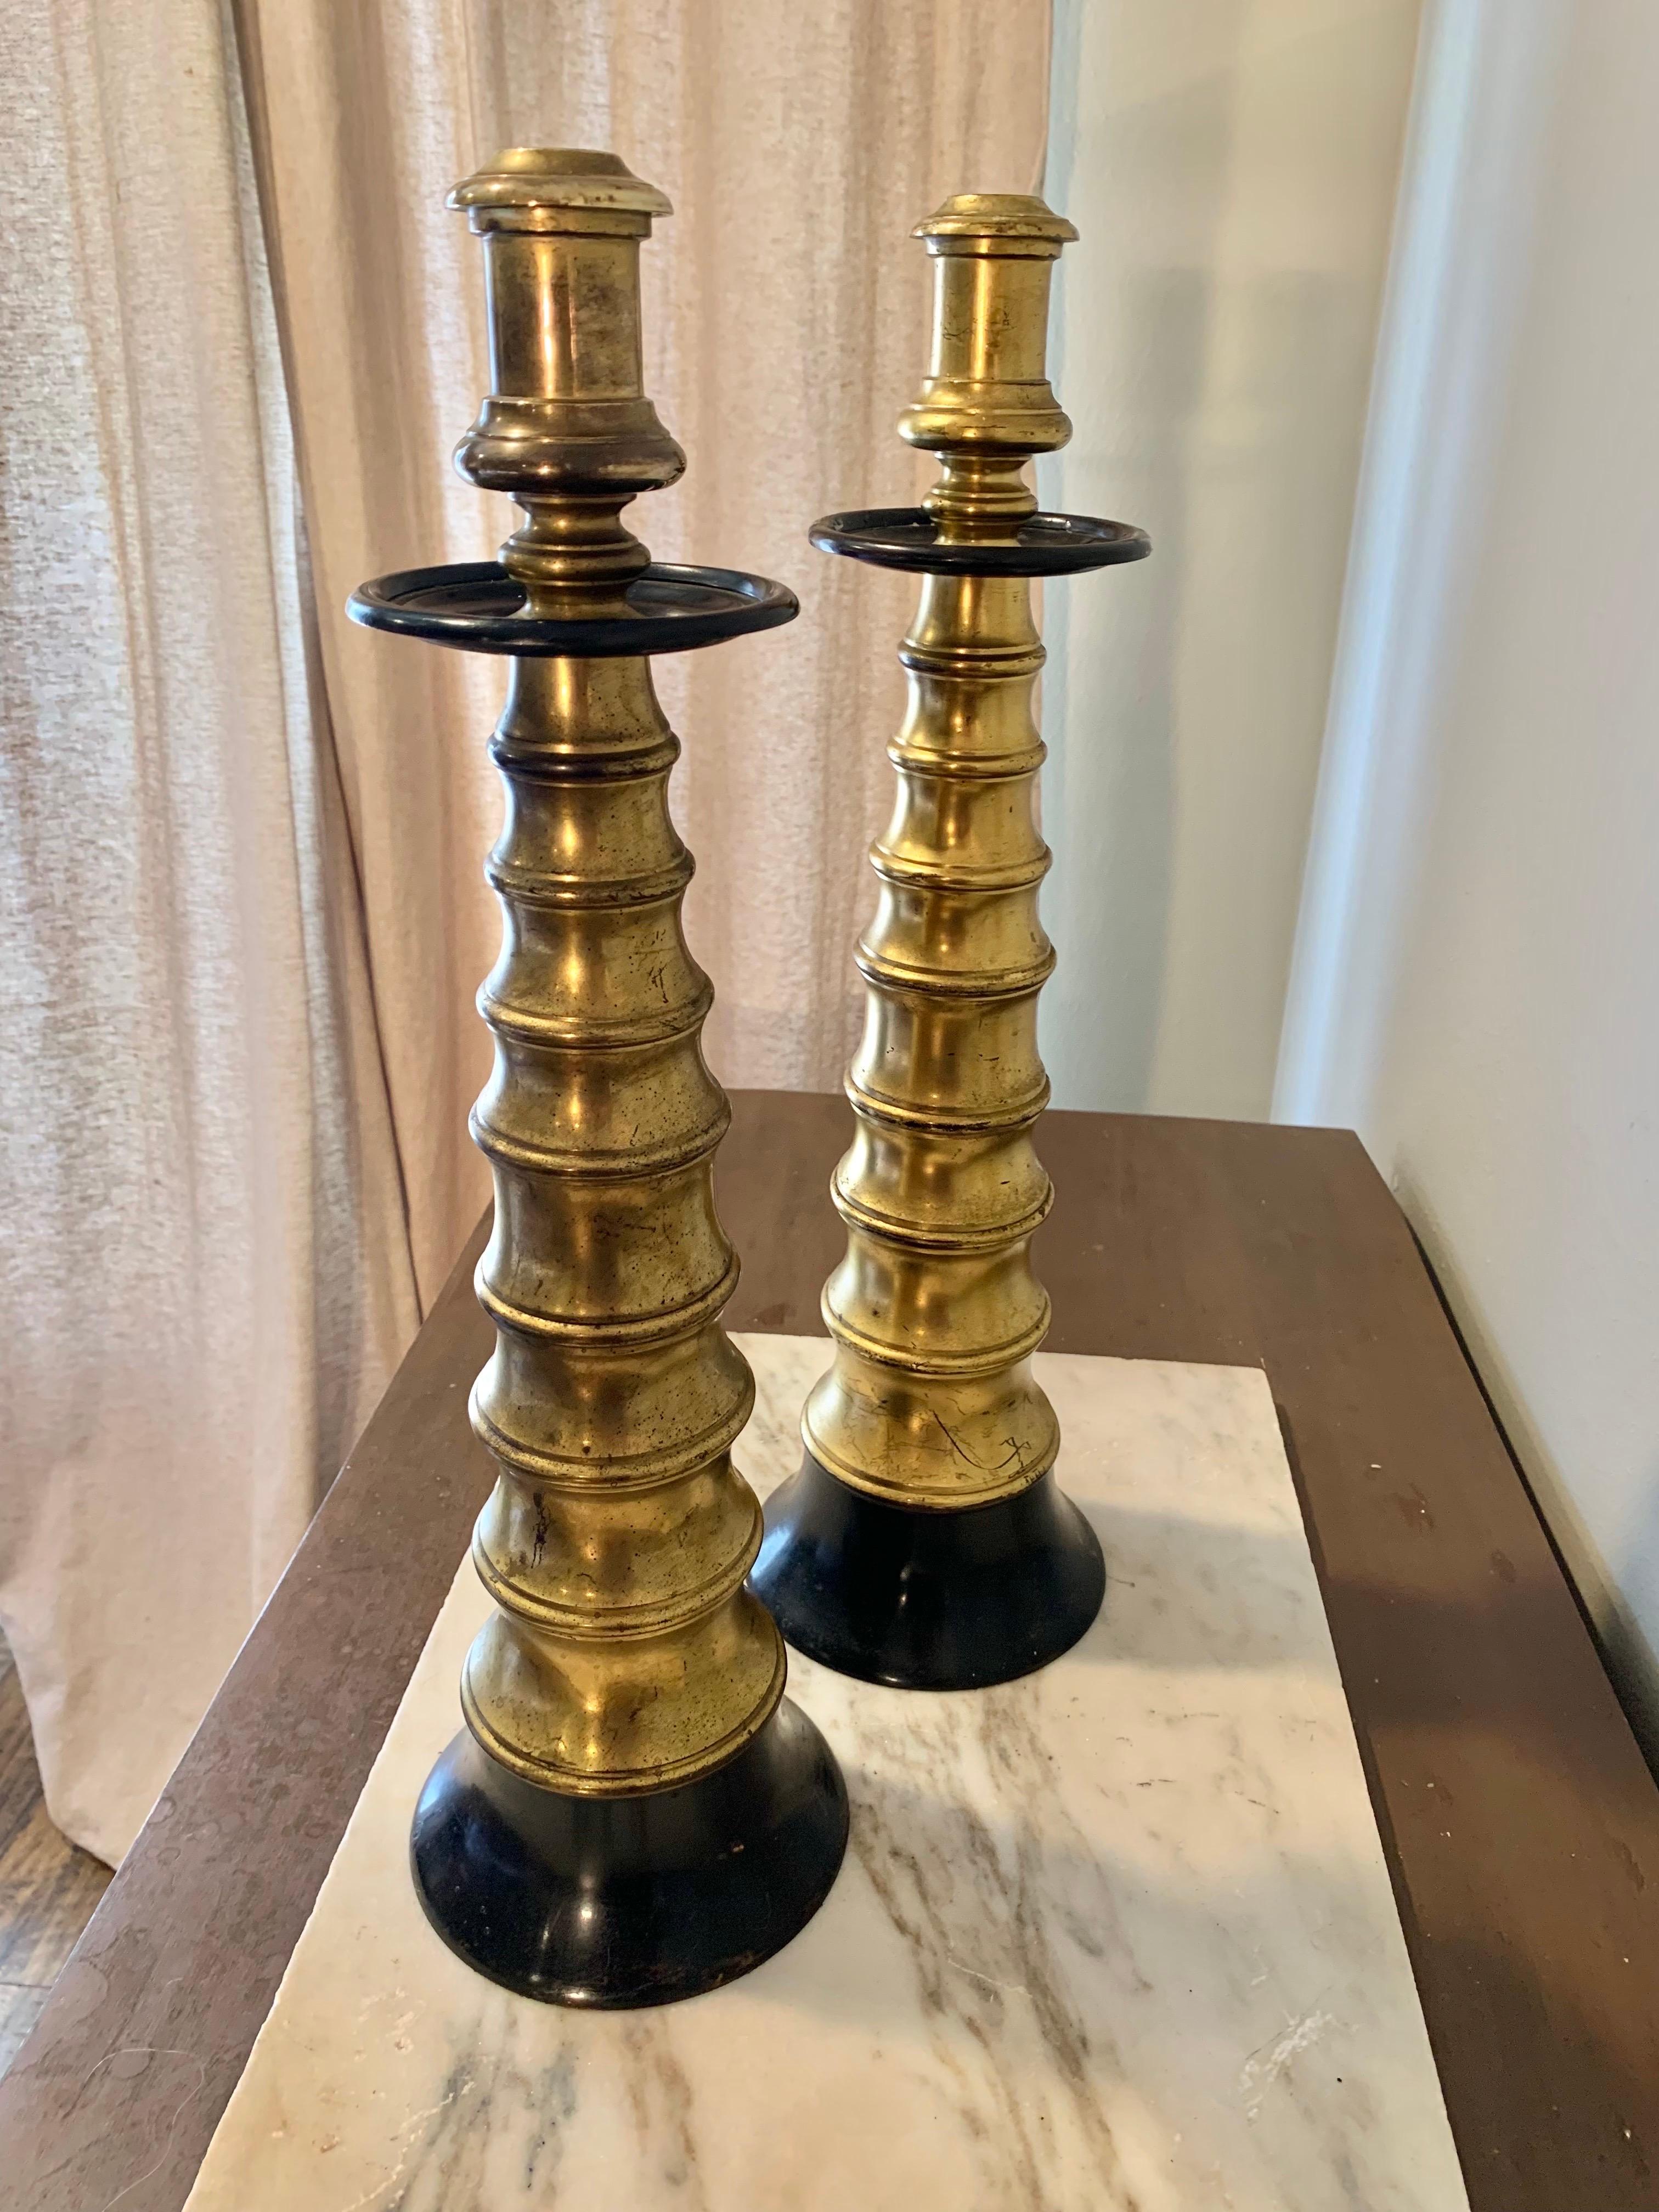 Mid 20th Century Brass and Ebonized Candle Holders - a Pair For Sale 5